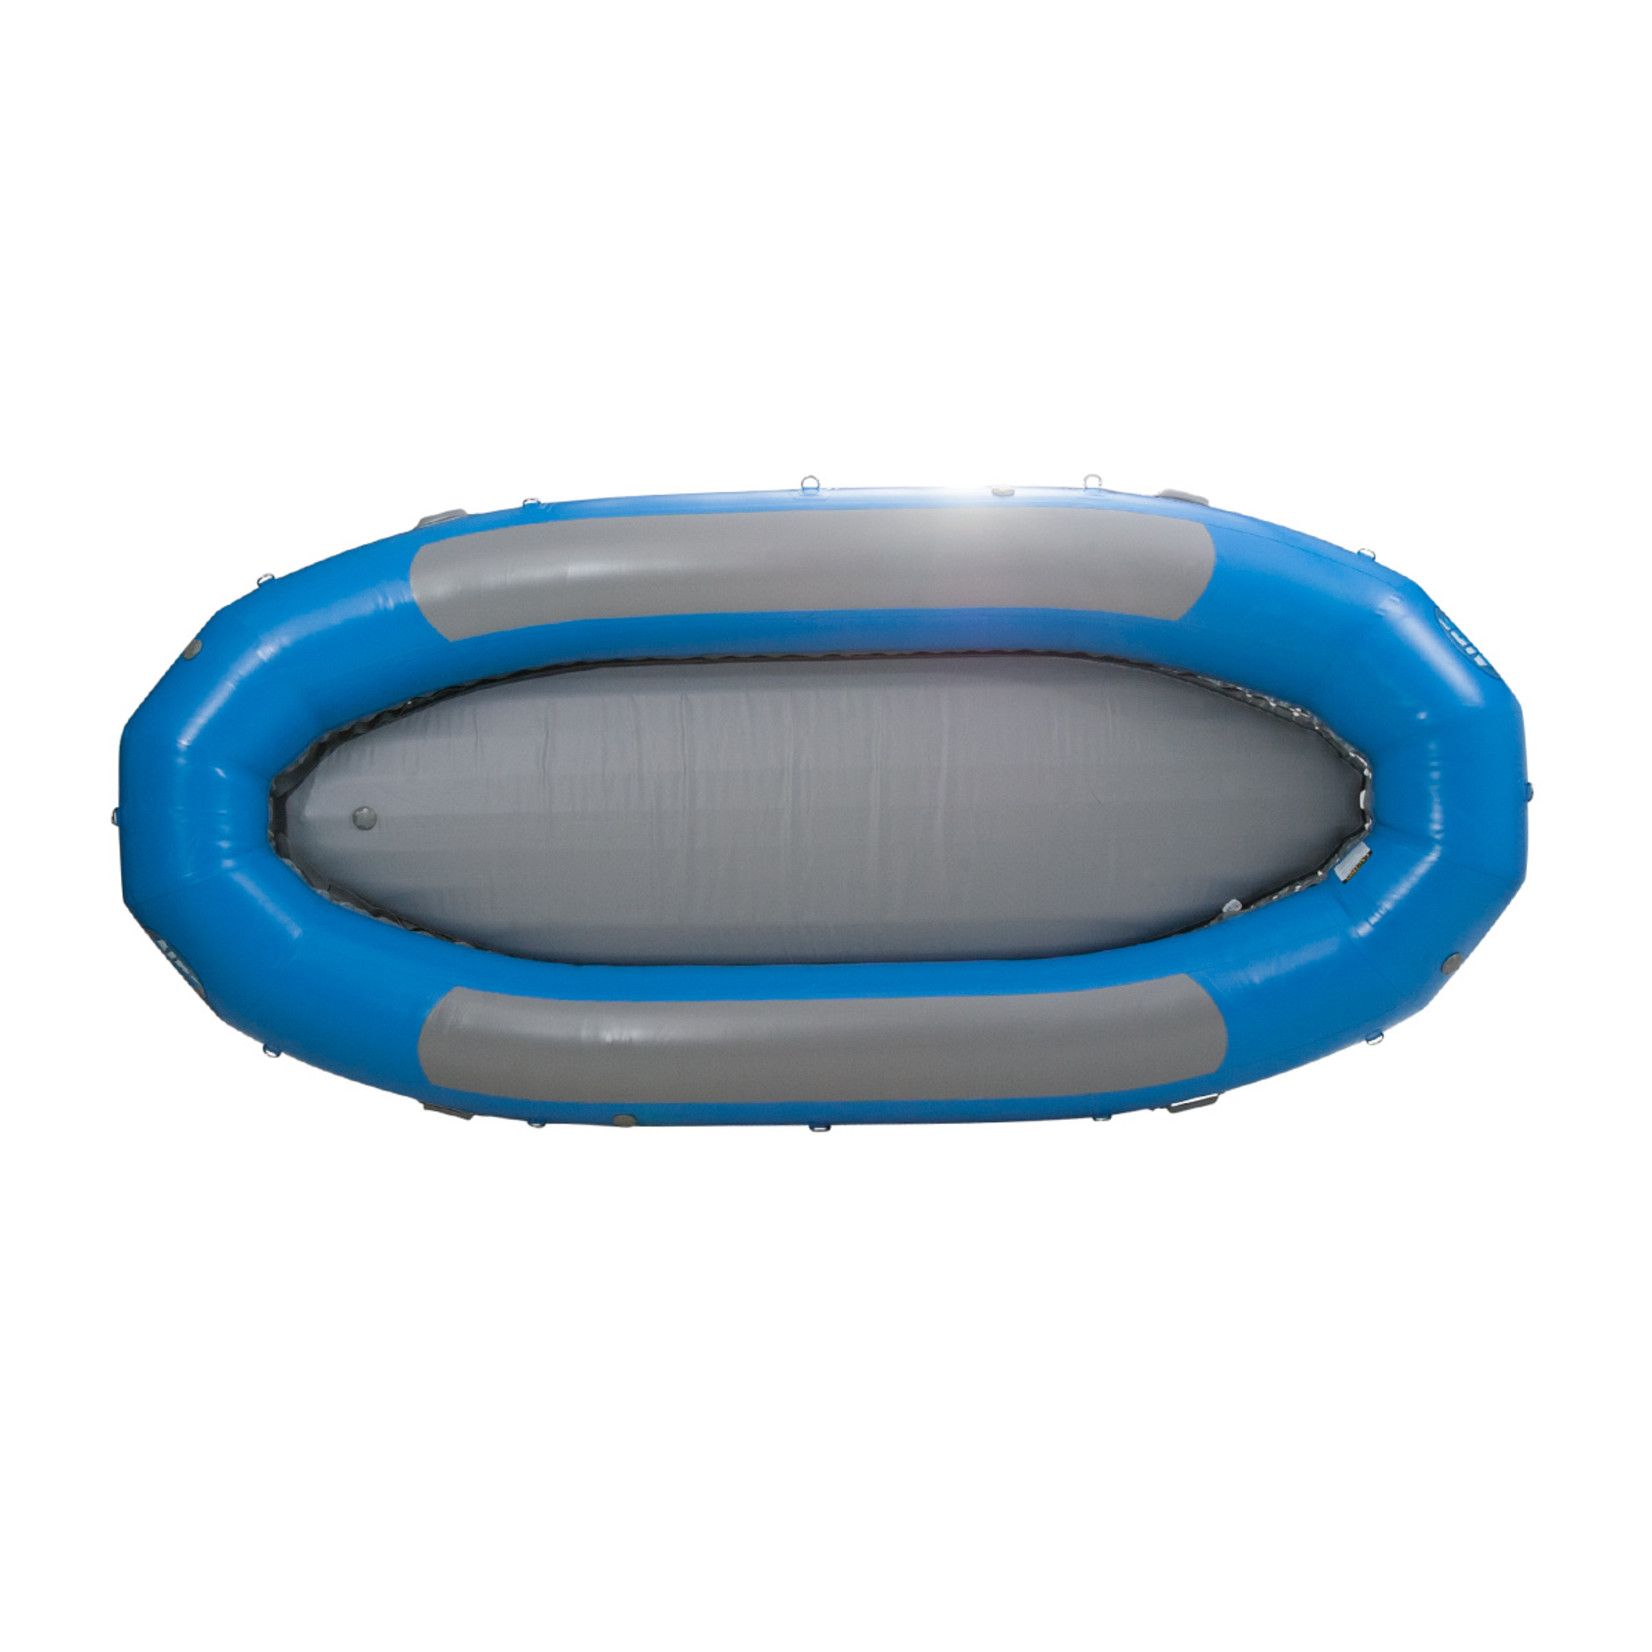 AIRE AIRE 130D  Self-Bailing Raft